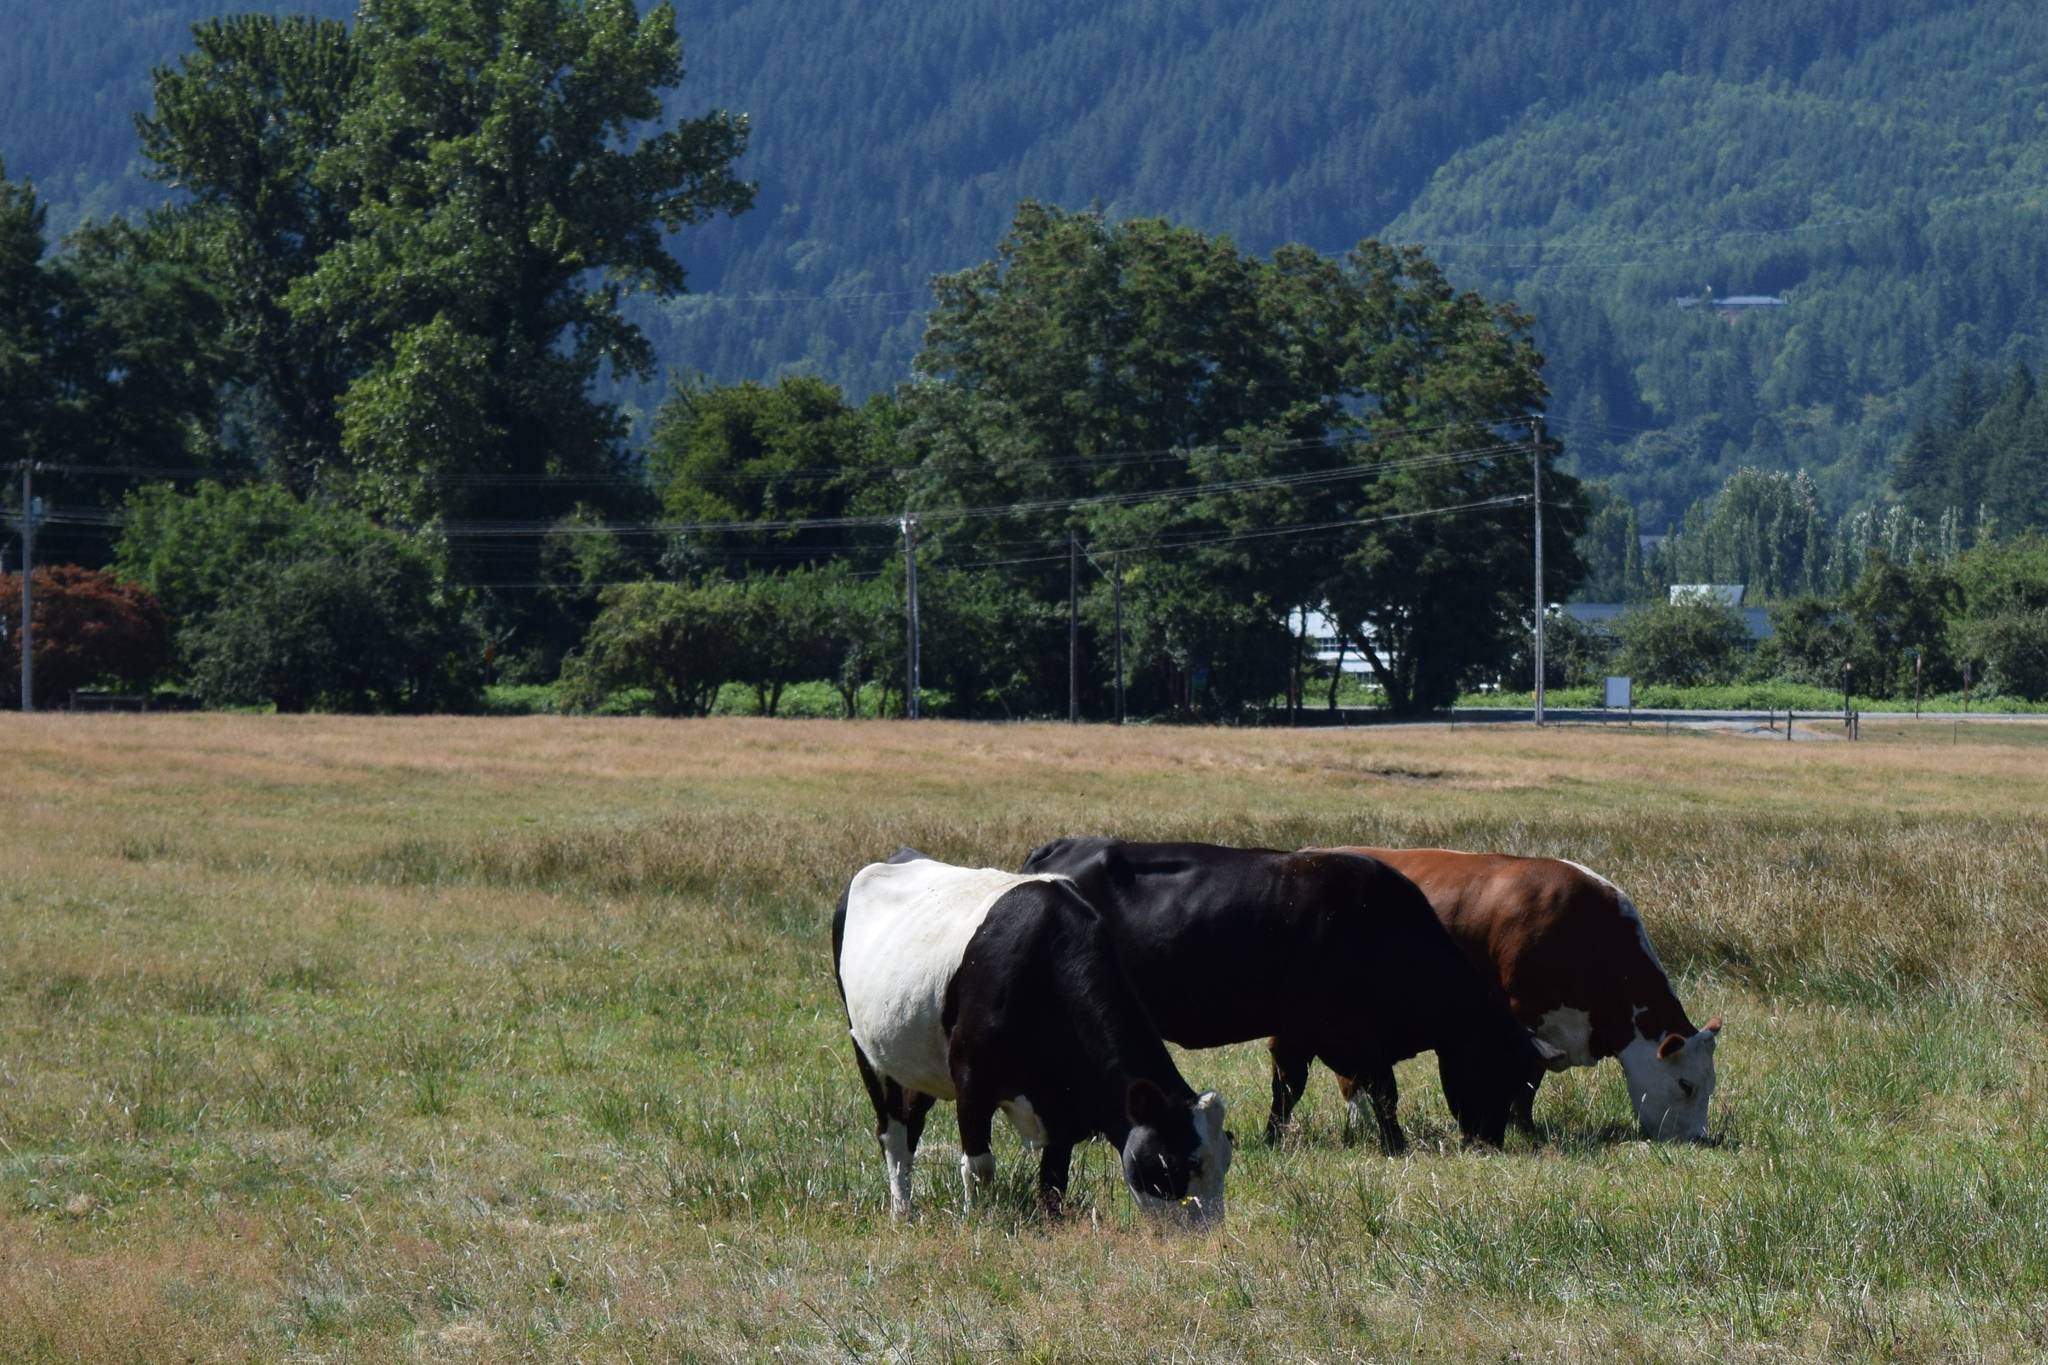 Cows at Tollgate Farm Park in North Bend. Photo by Conor Wilson/Snoqualmie Valley Record